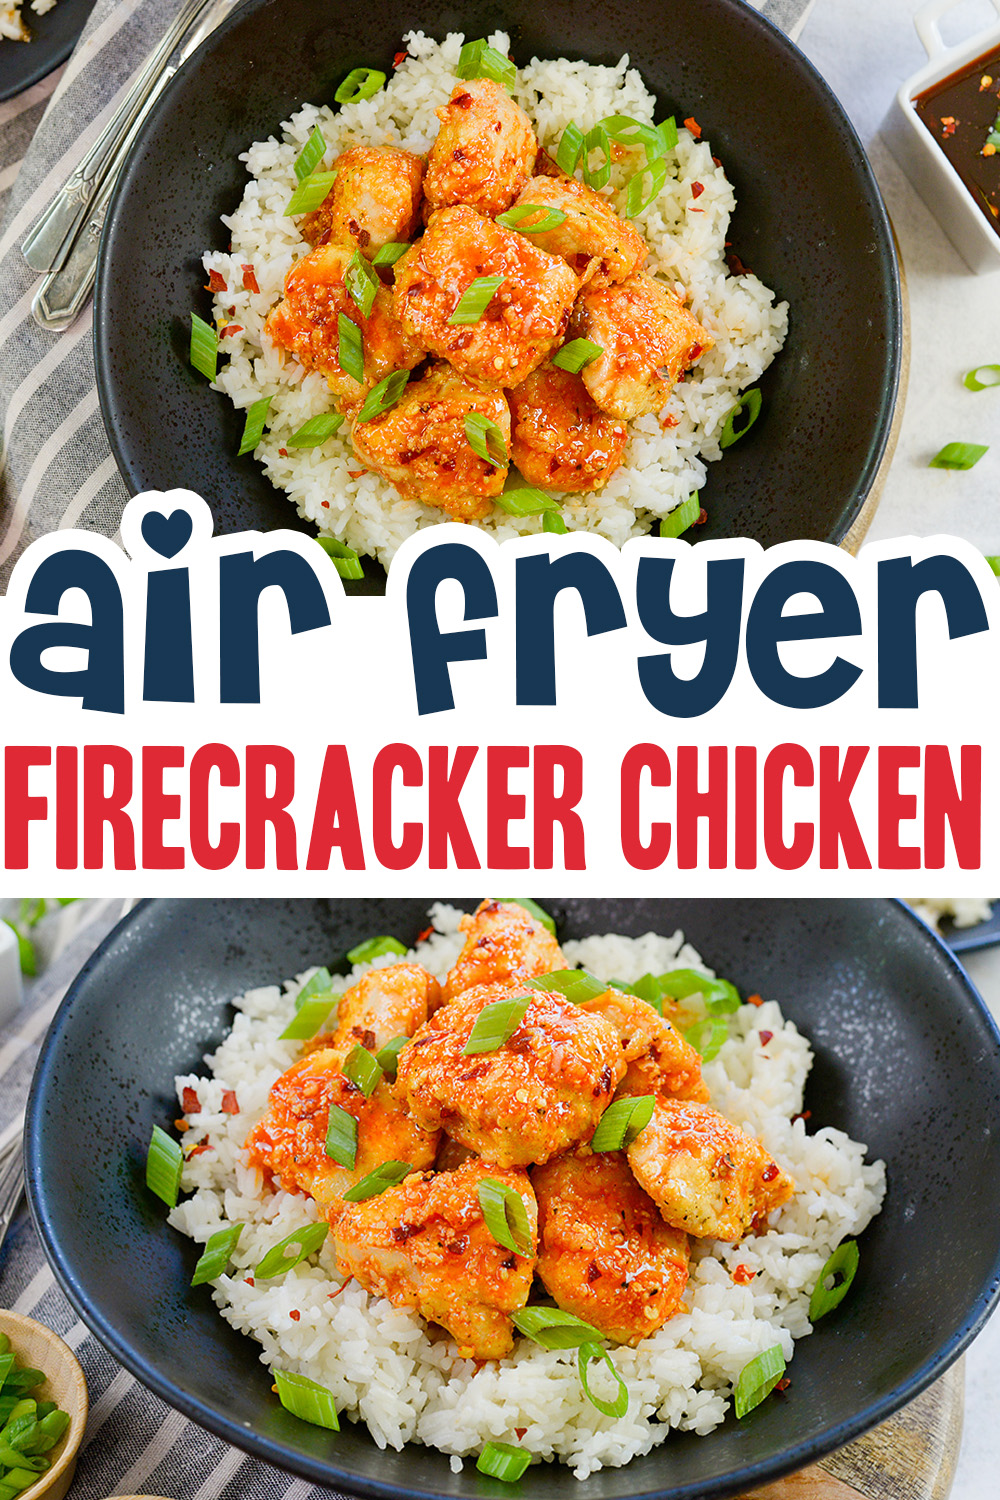 This air fryer firecracker chicken dish is great served over rice!